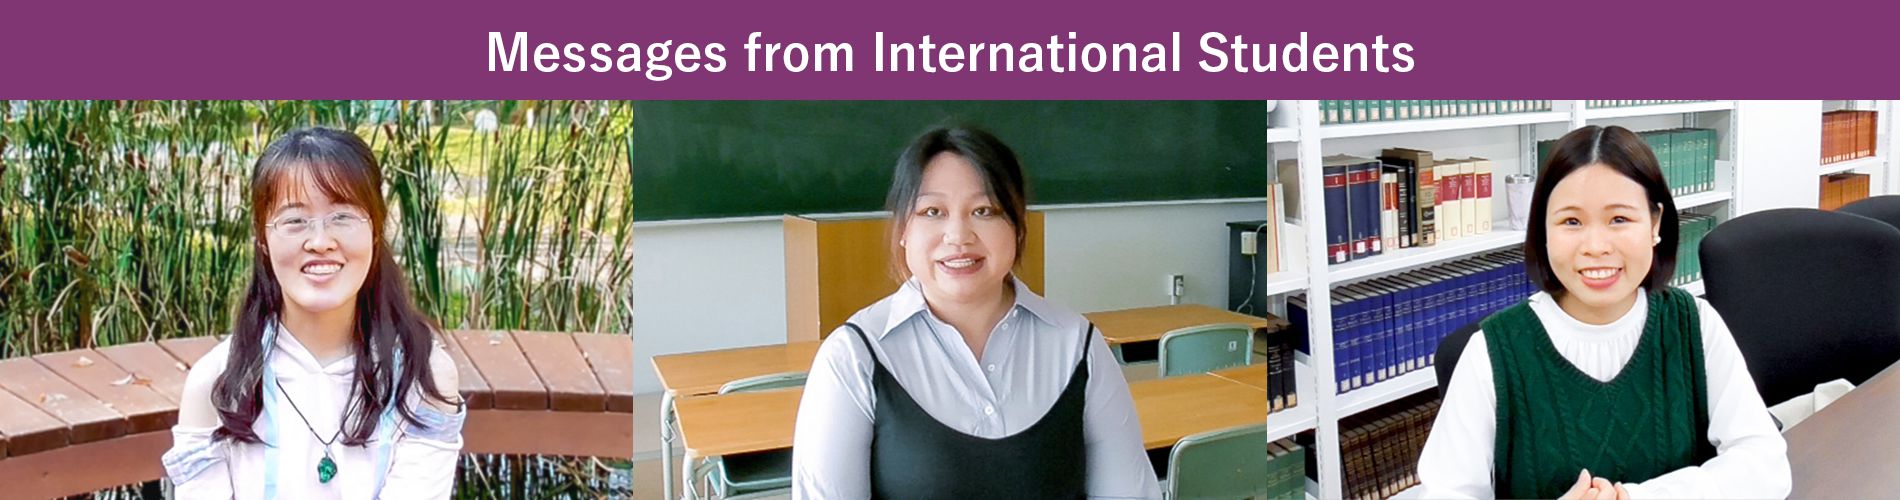 Messages from International Students